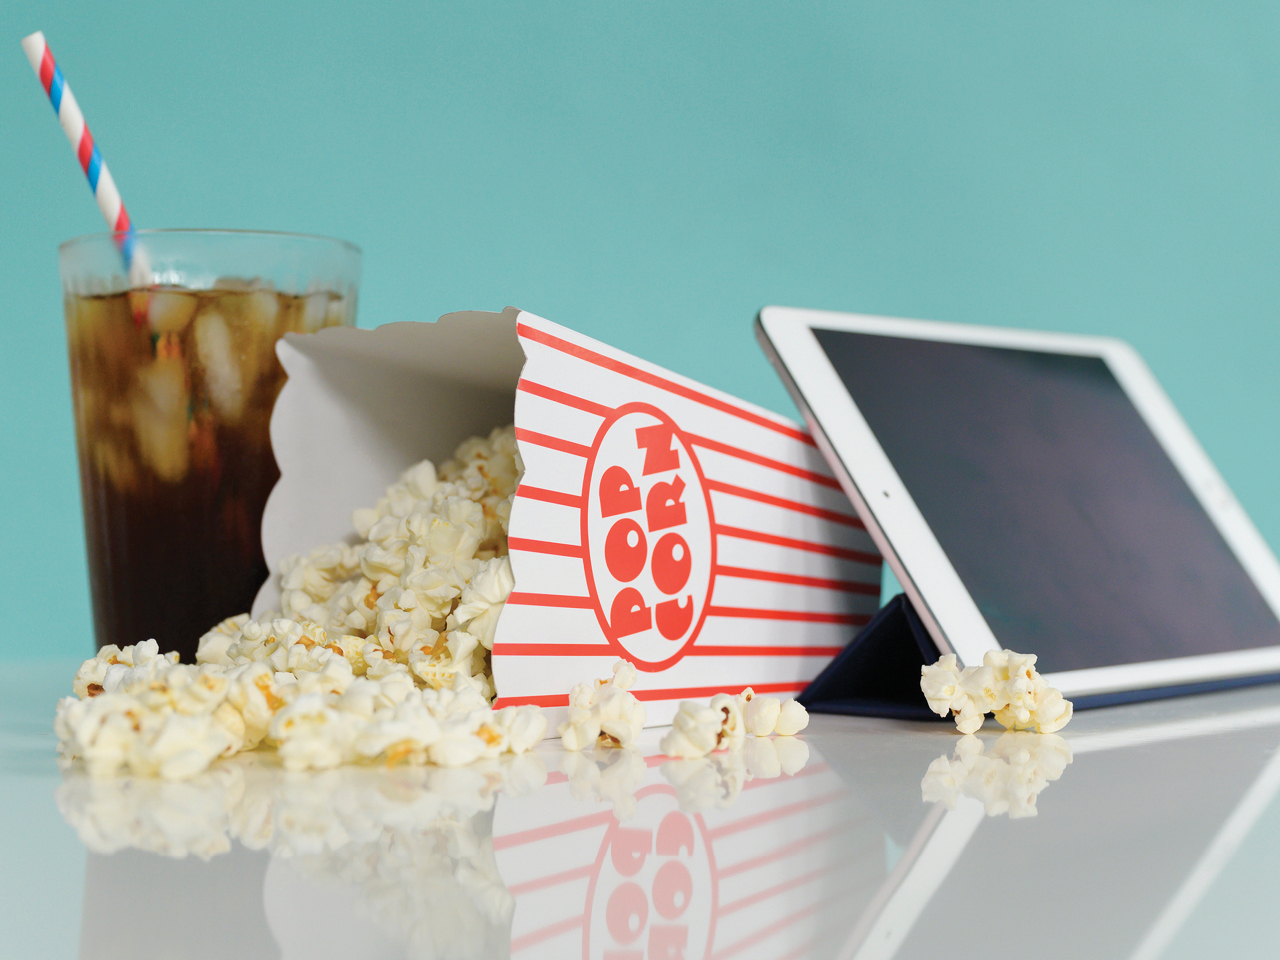 A glass of soda, a tipped over carton of popcorn, and an Ipad are displayed next to each other on a table